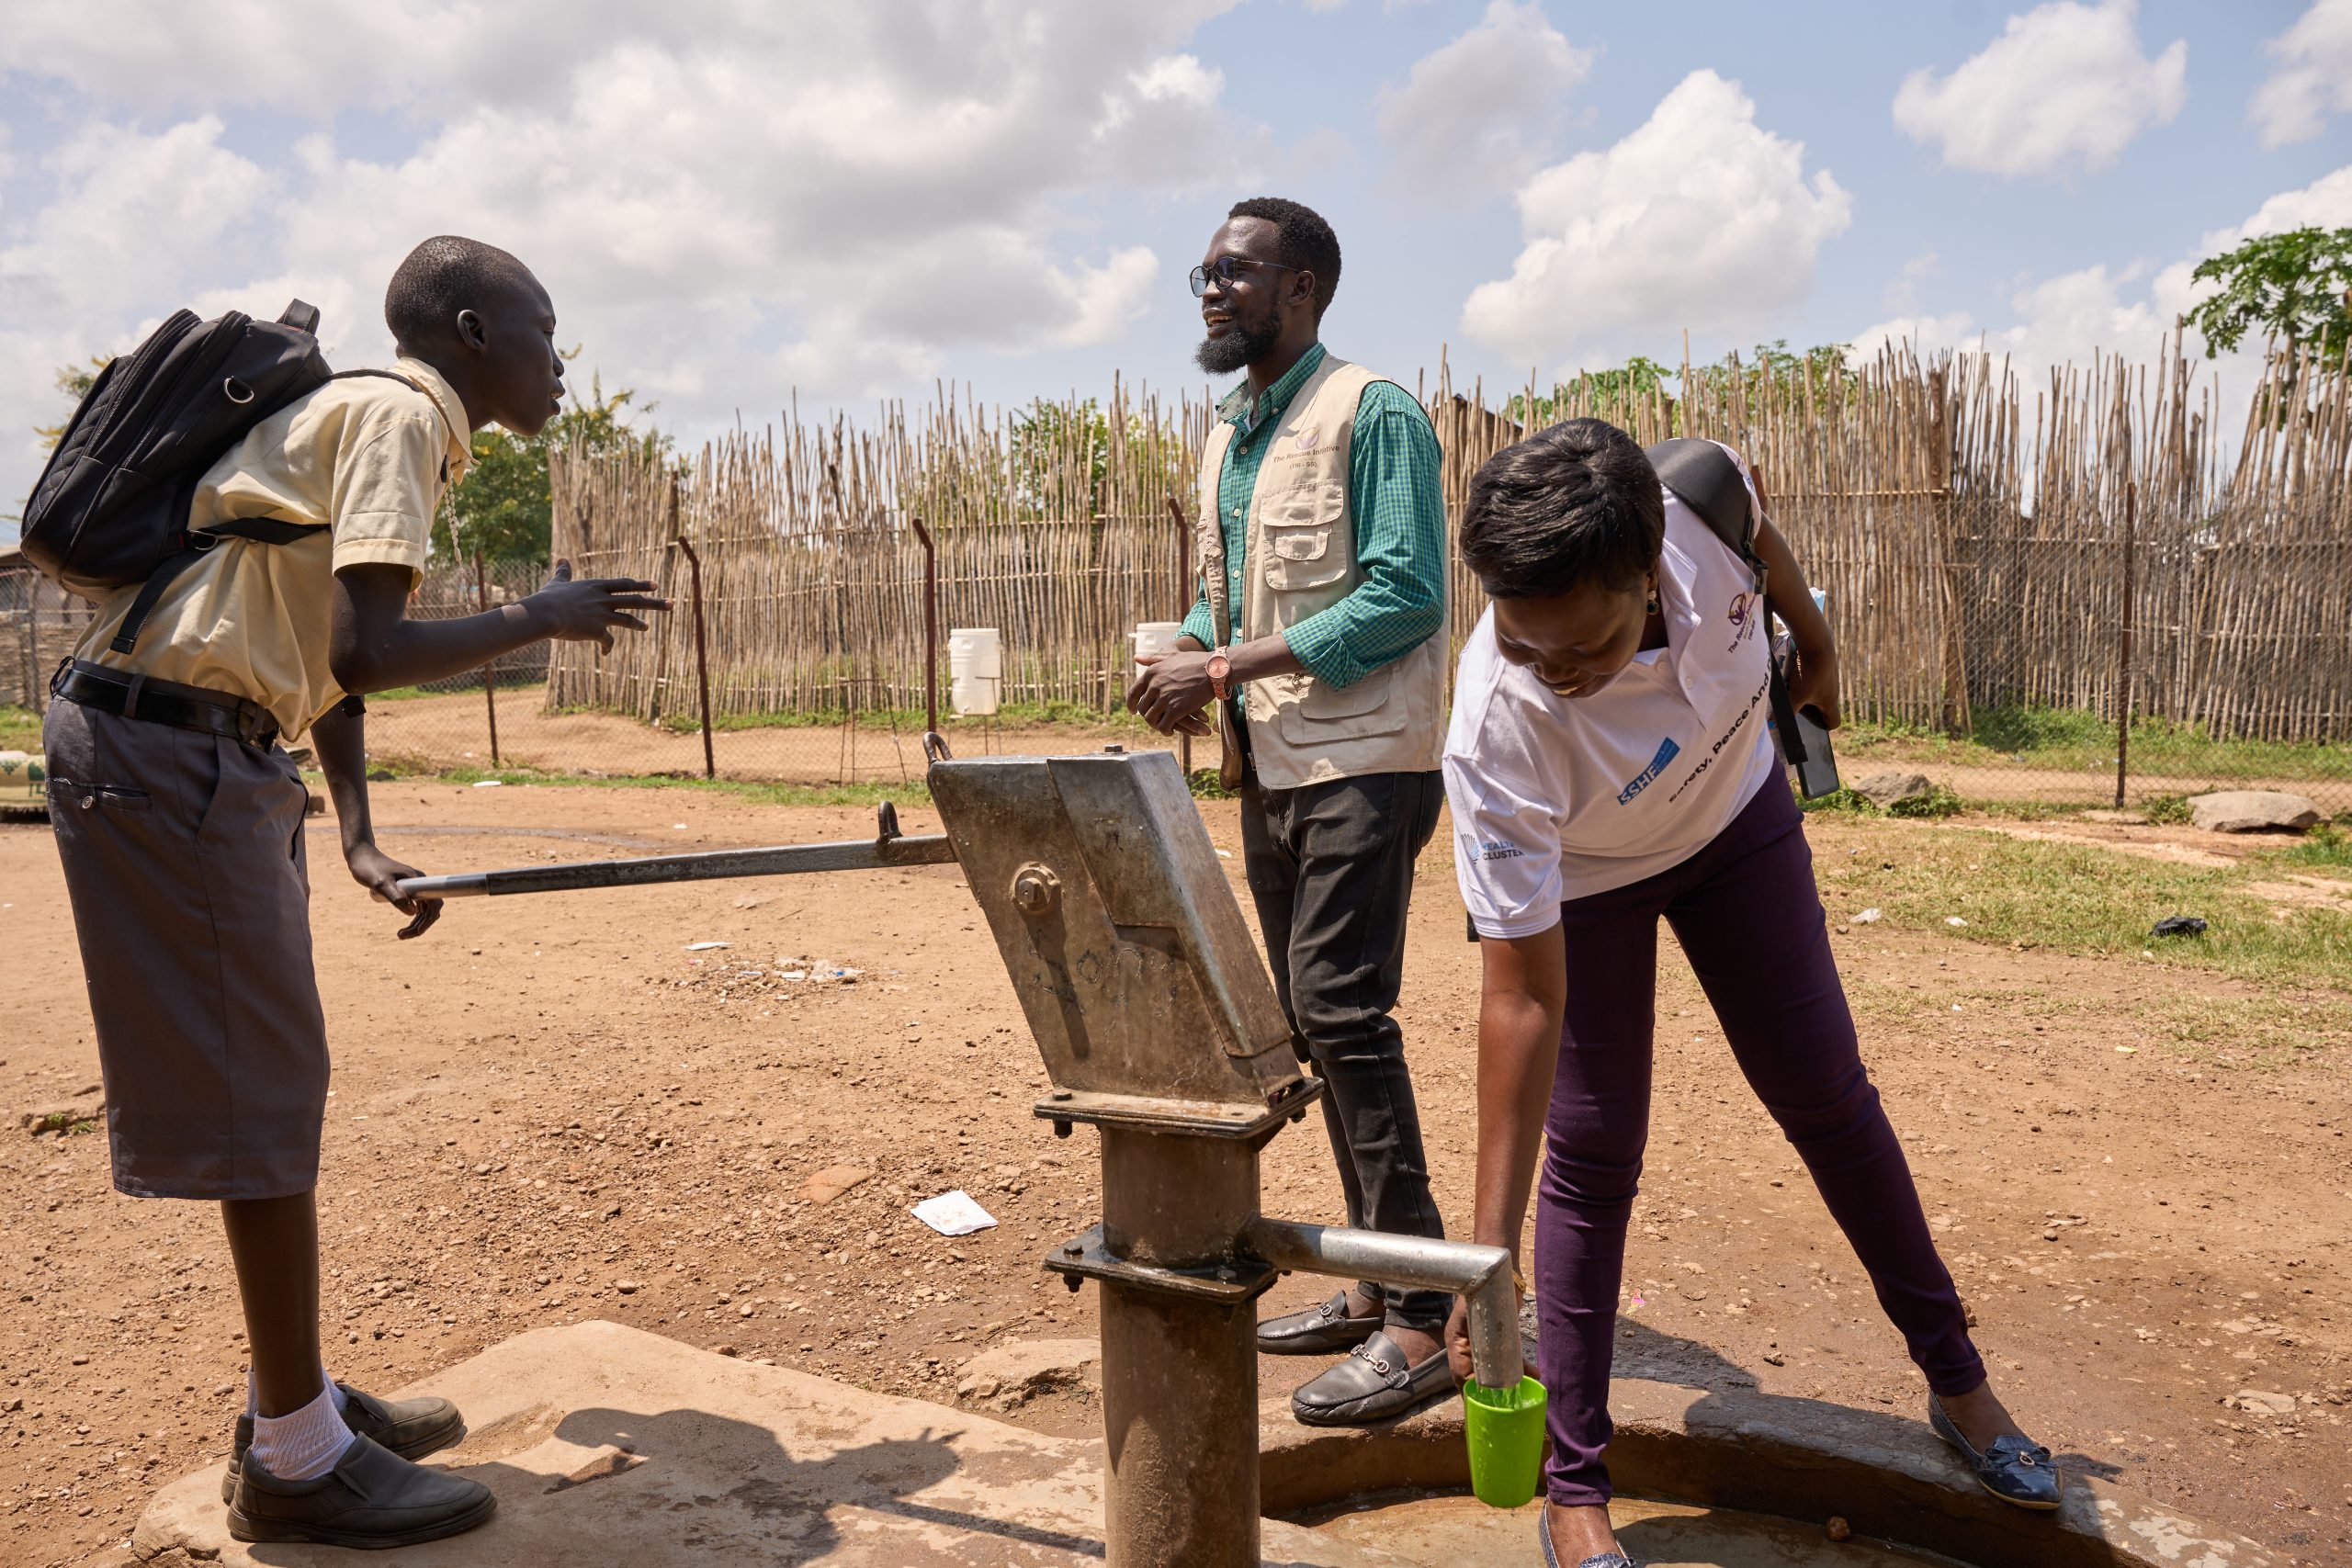 School staff demonstrate the operation of a fresh water pump. A young schoolboy holds the handle of the fresh water pump.
